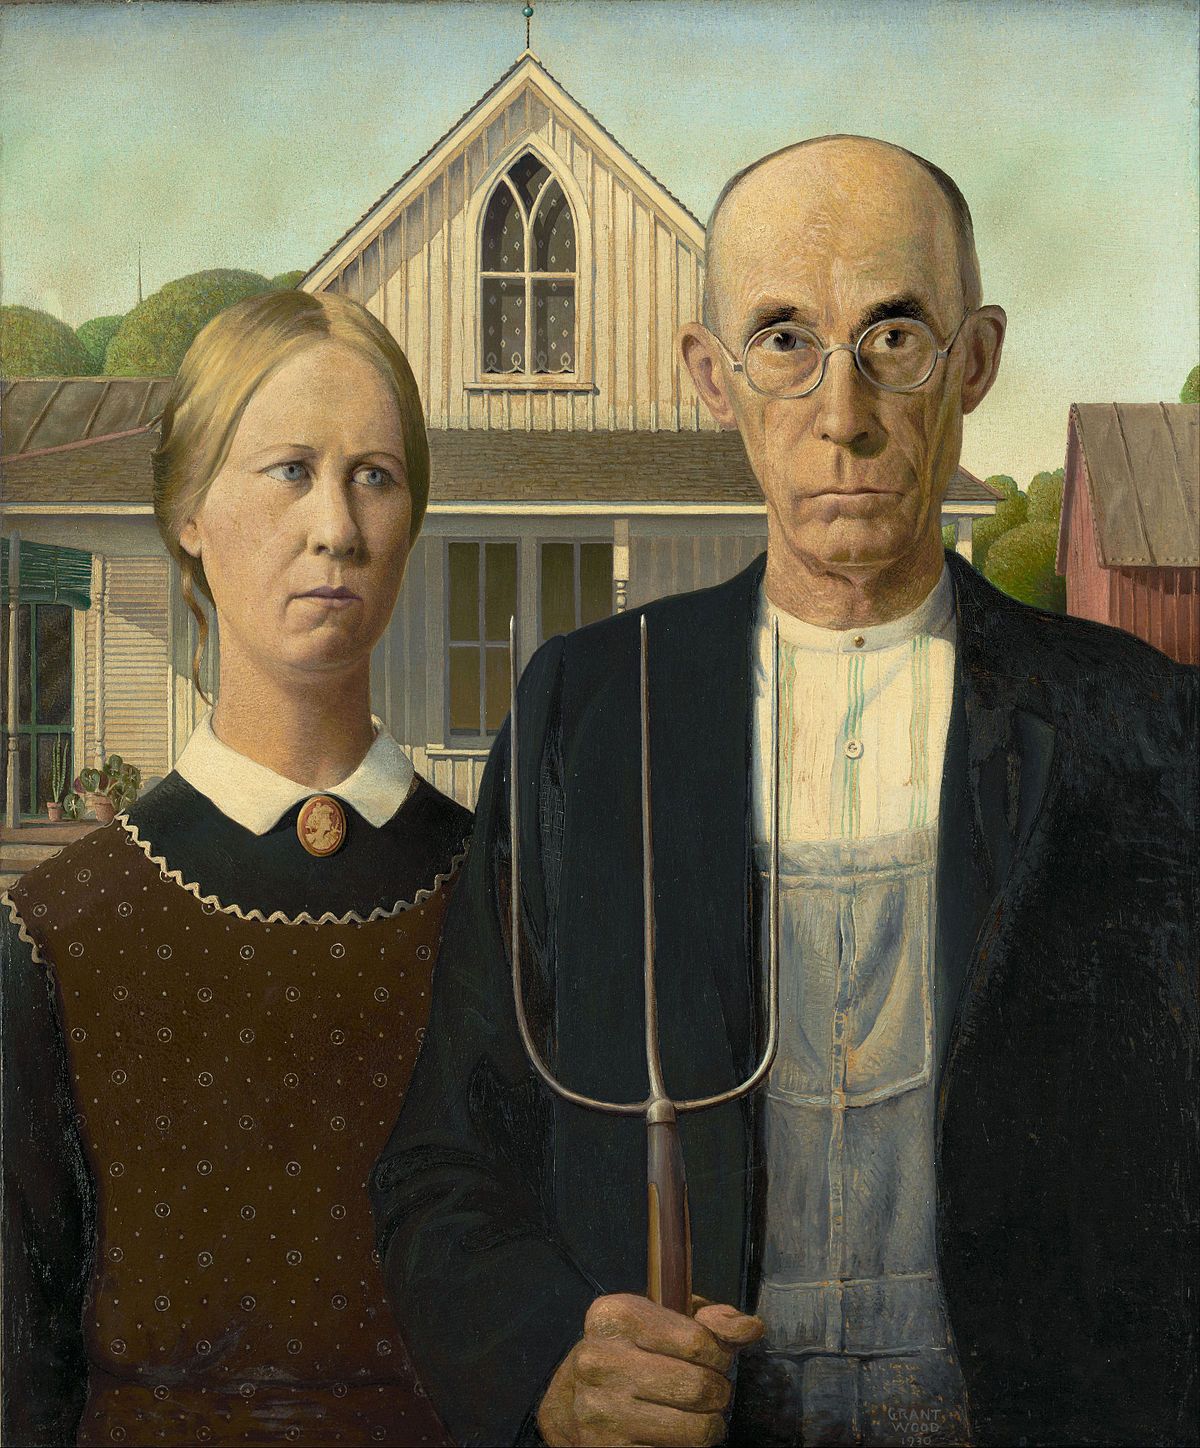 American Gothic inspired a painting in Among Us